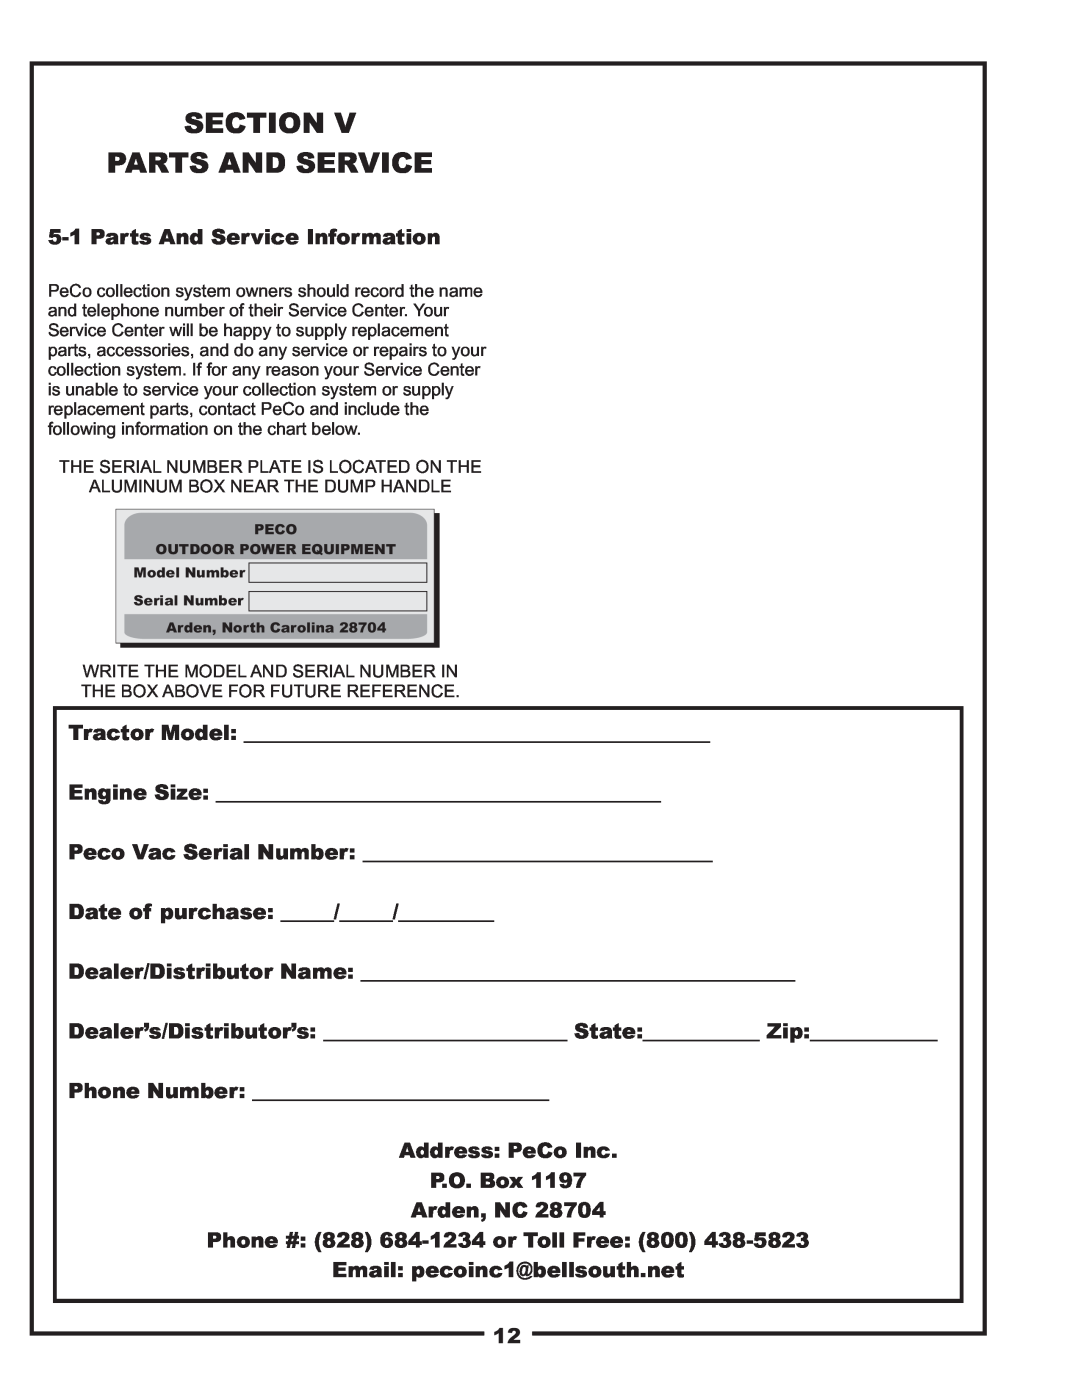 Toro 22621223-24 manual Section Parts And Service, Parts And Service Information 